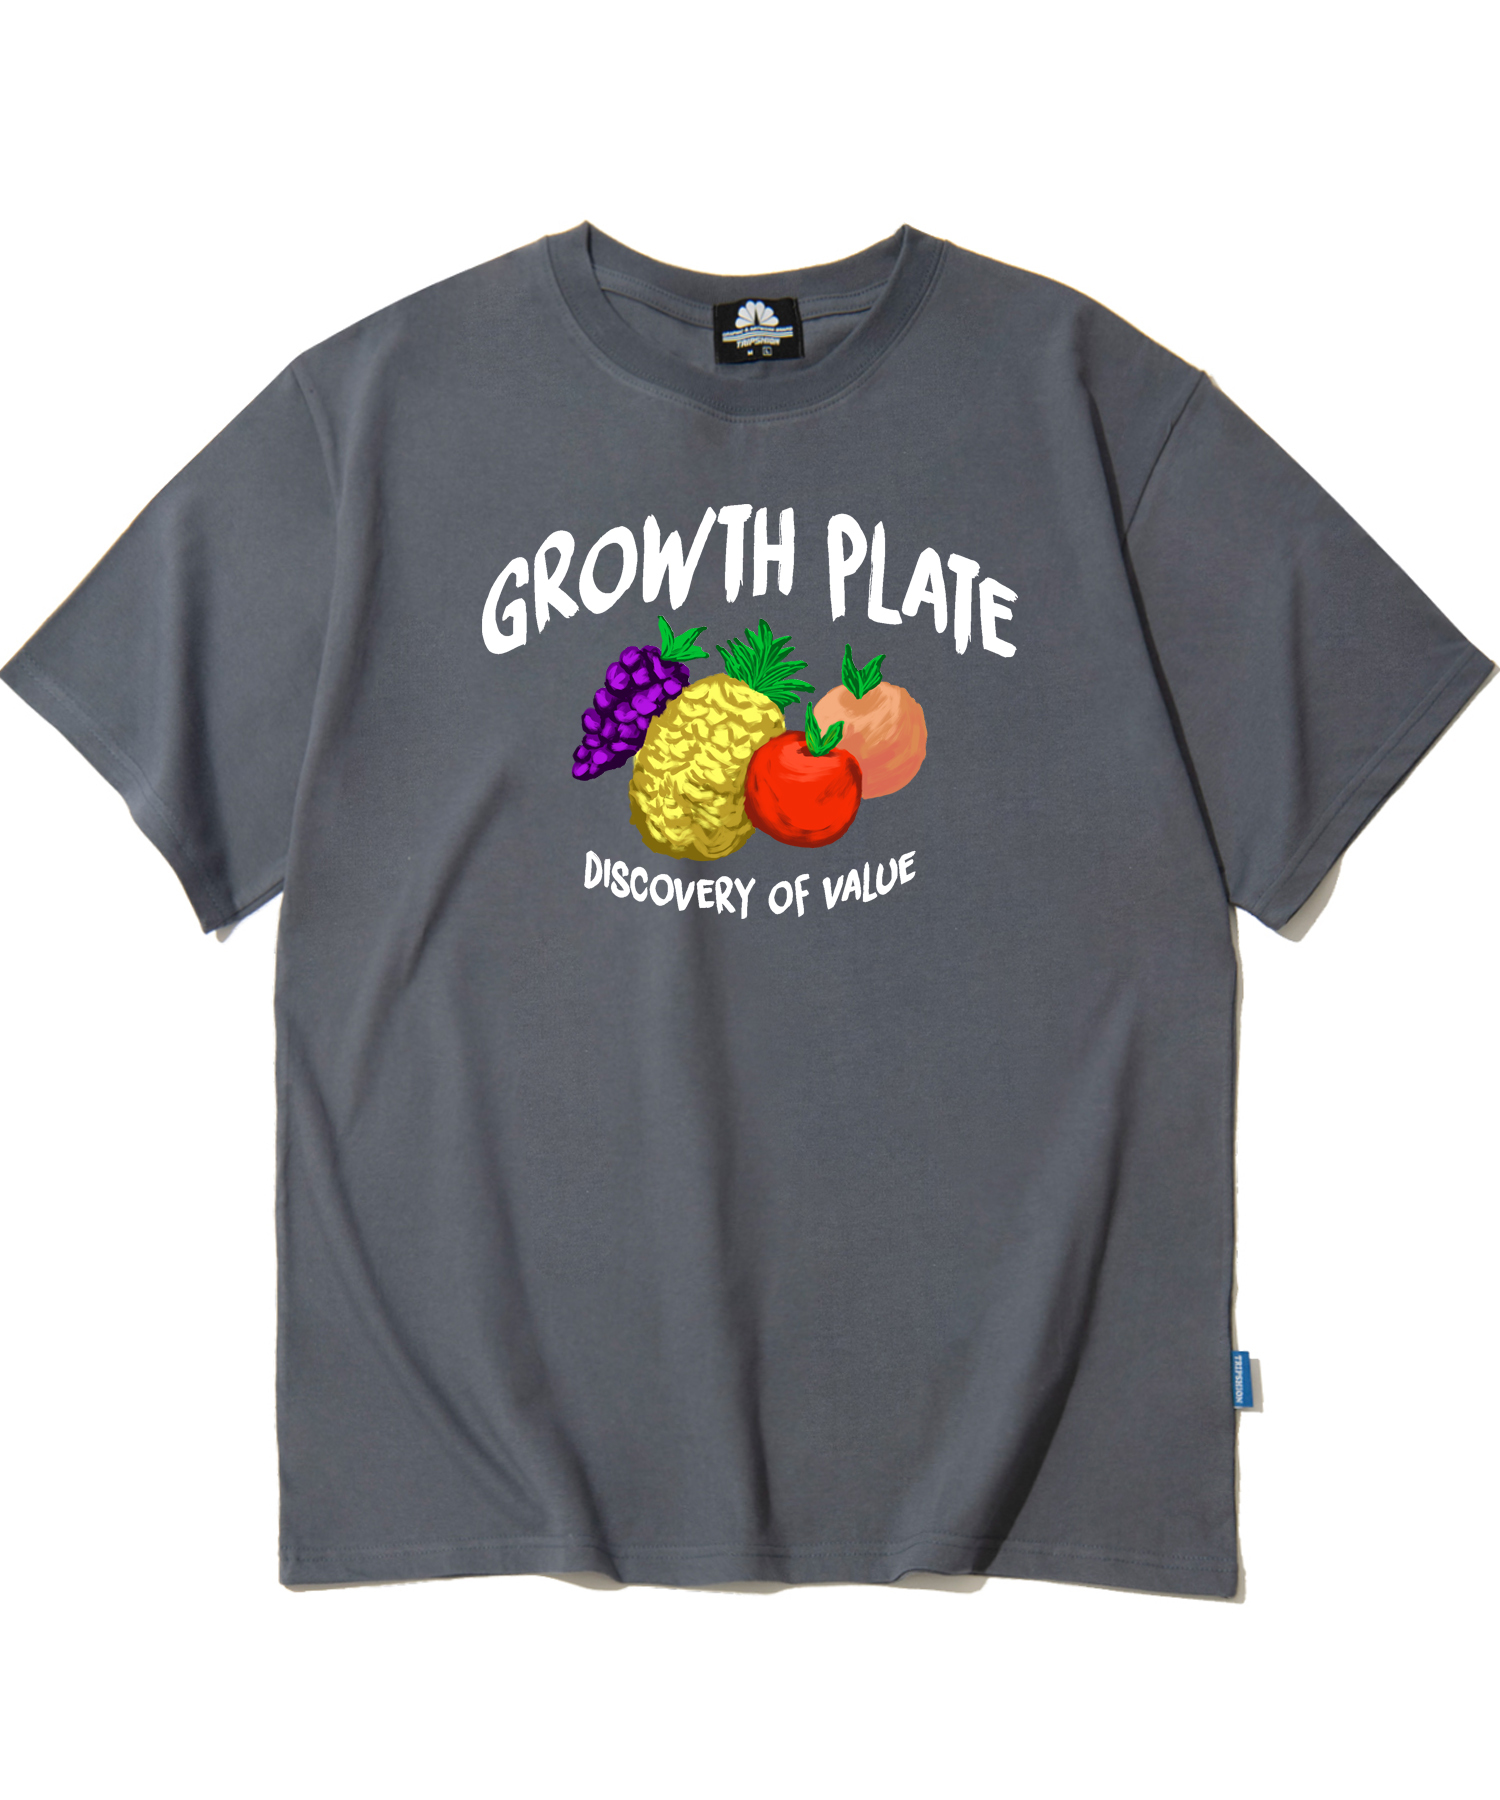 GROWTH PLATE FRUITS GRAPHIC T-SHIRTS - GRAY